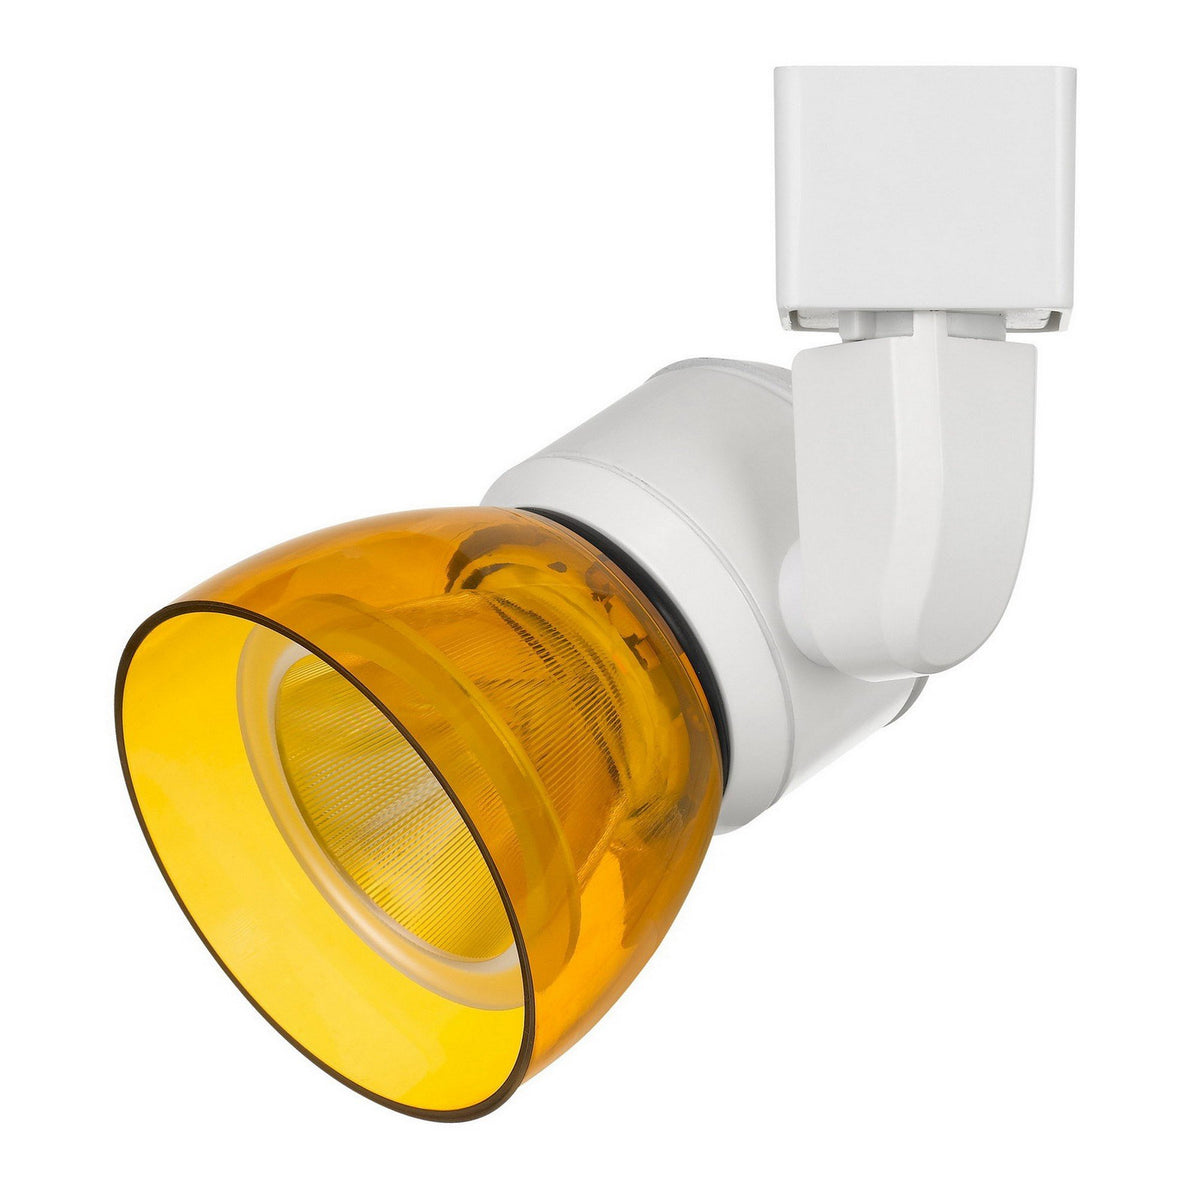 10W Integrated LED Track Fixture with Polycarbonate Head, Yellow and White - BM220625